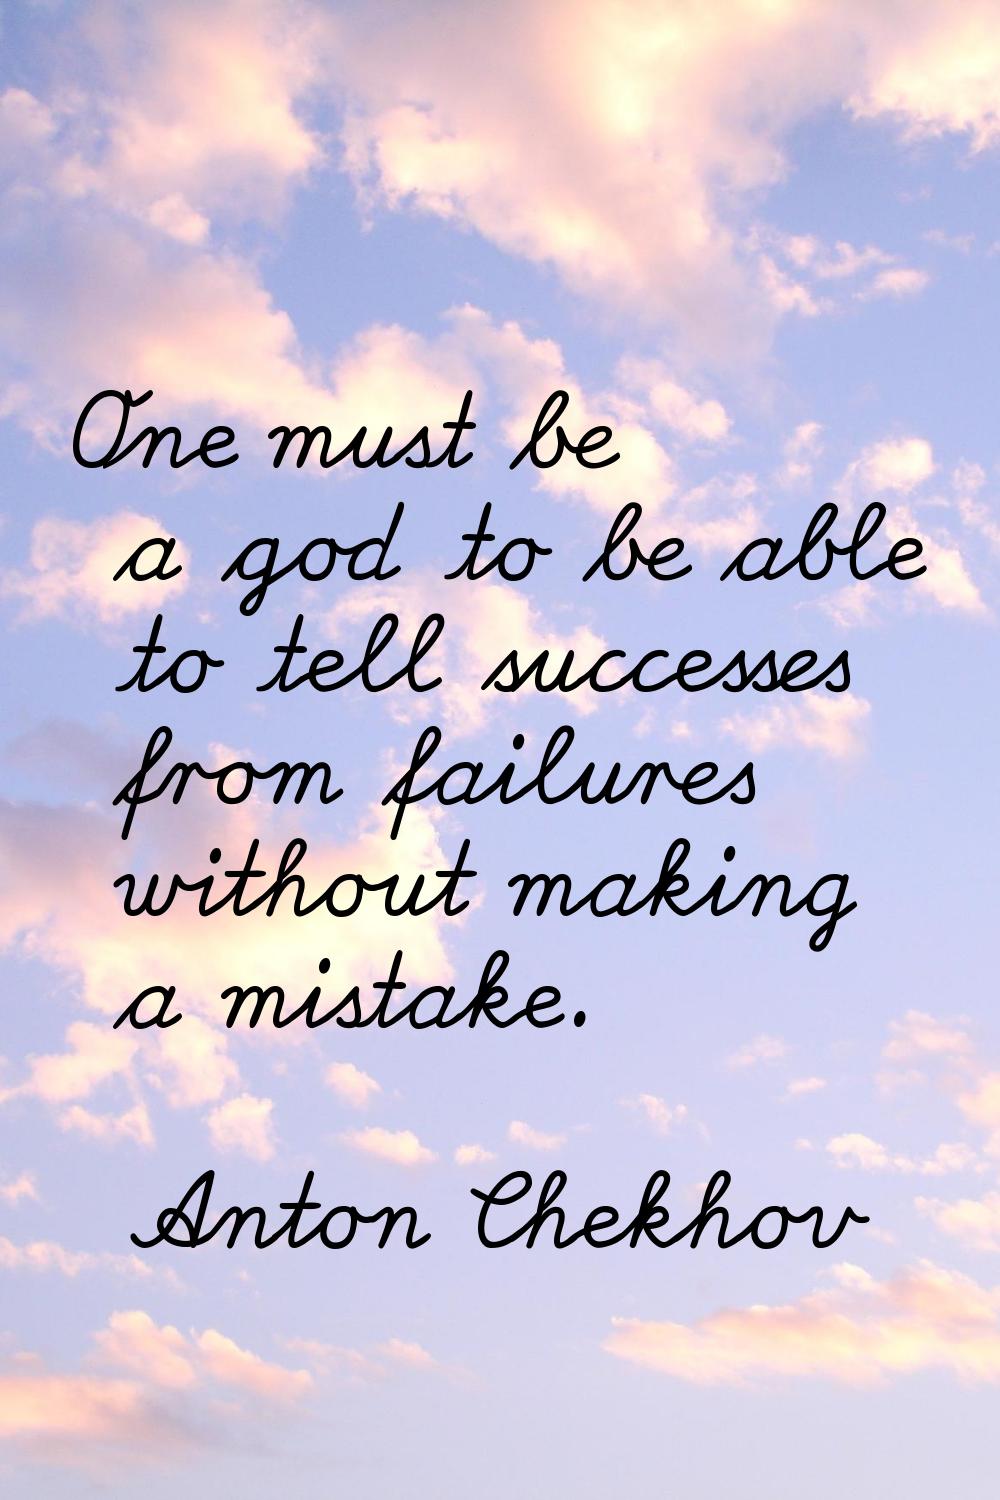 One must be a god to be able to tell successes from failures without making a mistake.